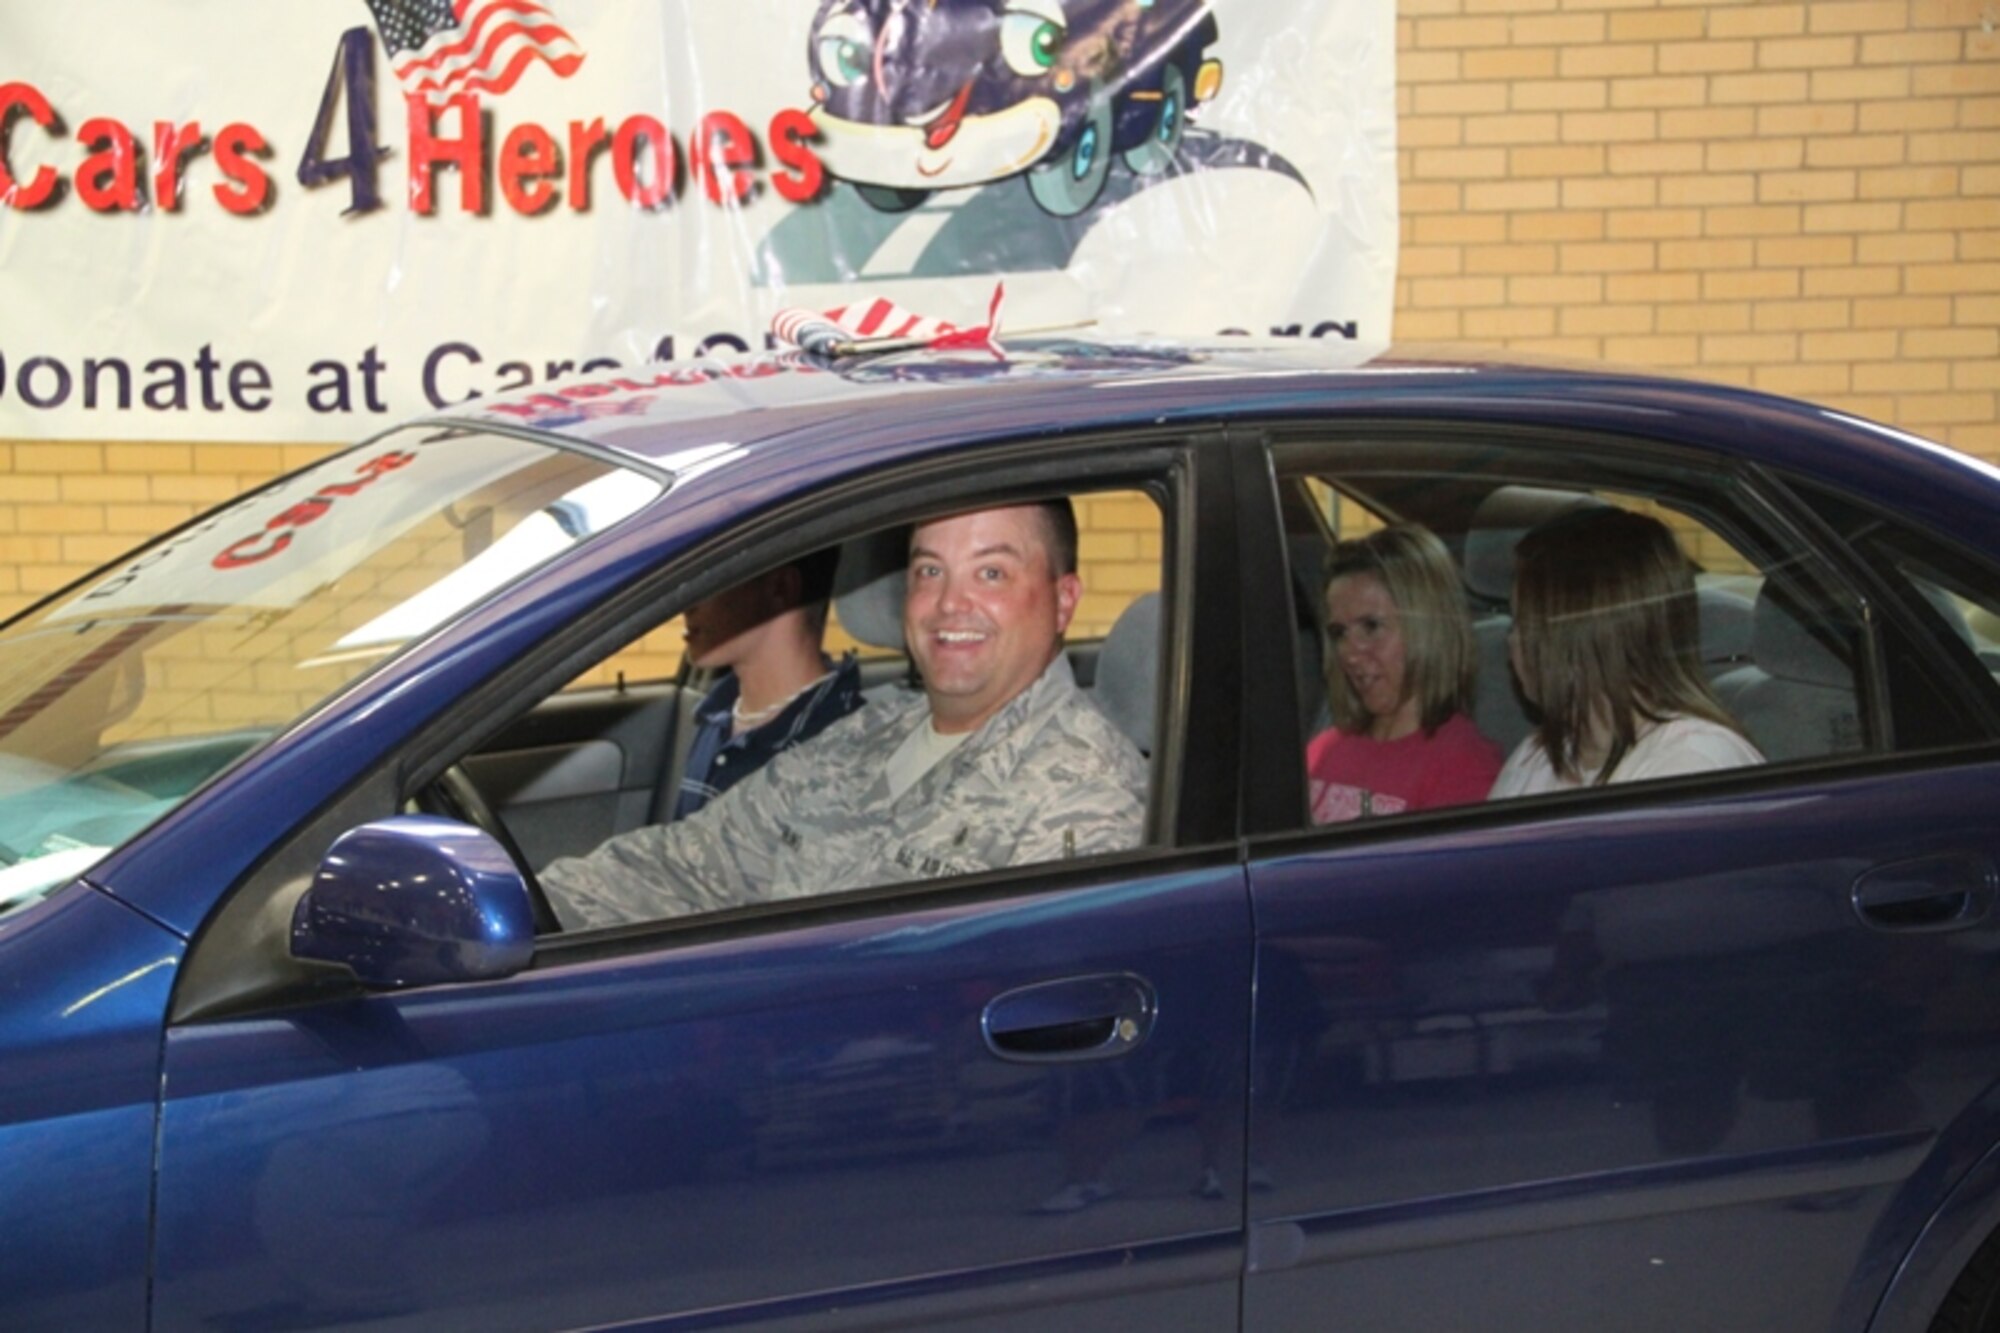 Master Sgt. Jeff Norling along with his family prepare to take their new car for a spin following the ceremony. (Photo by: Capt Joe Blubaugh)